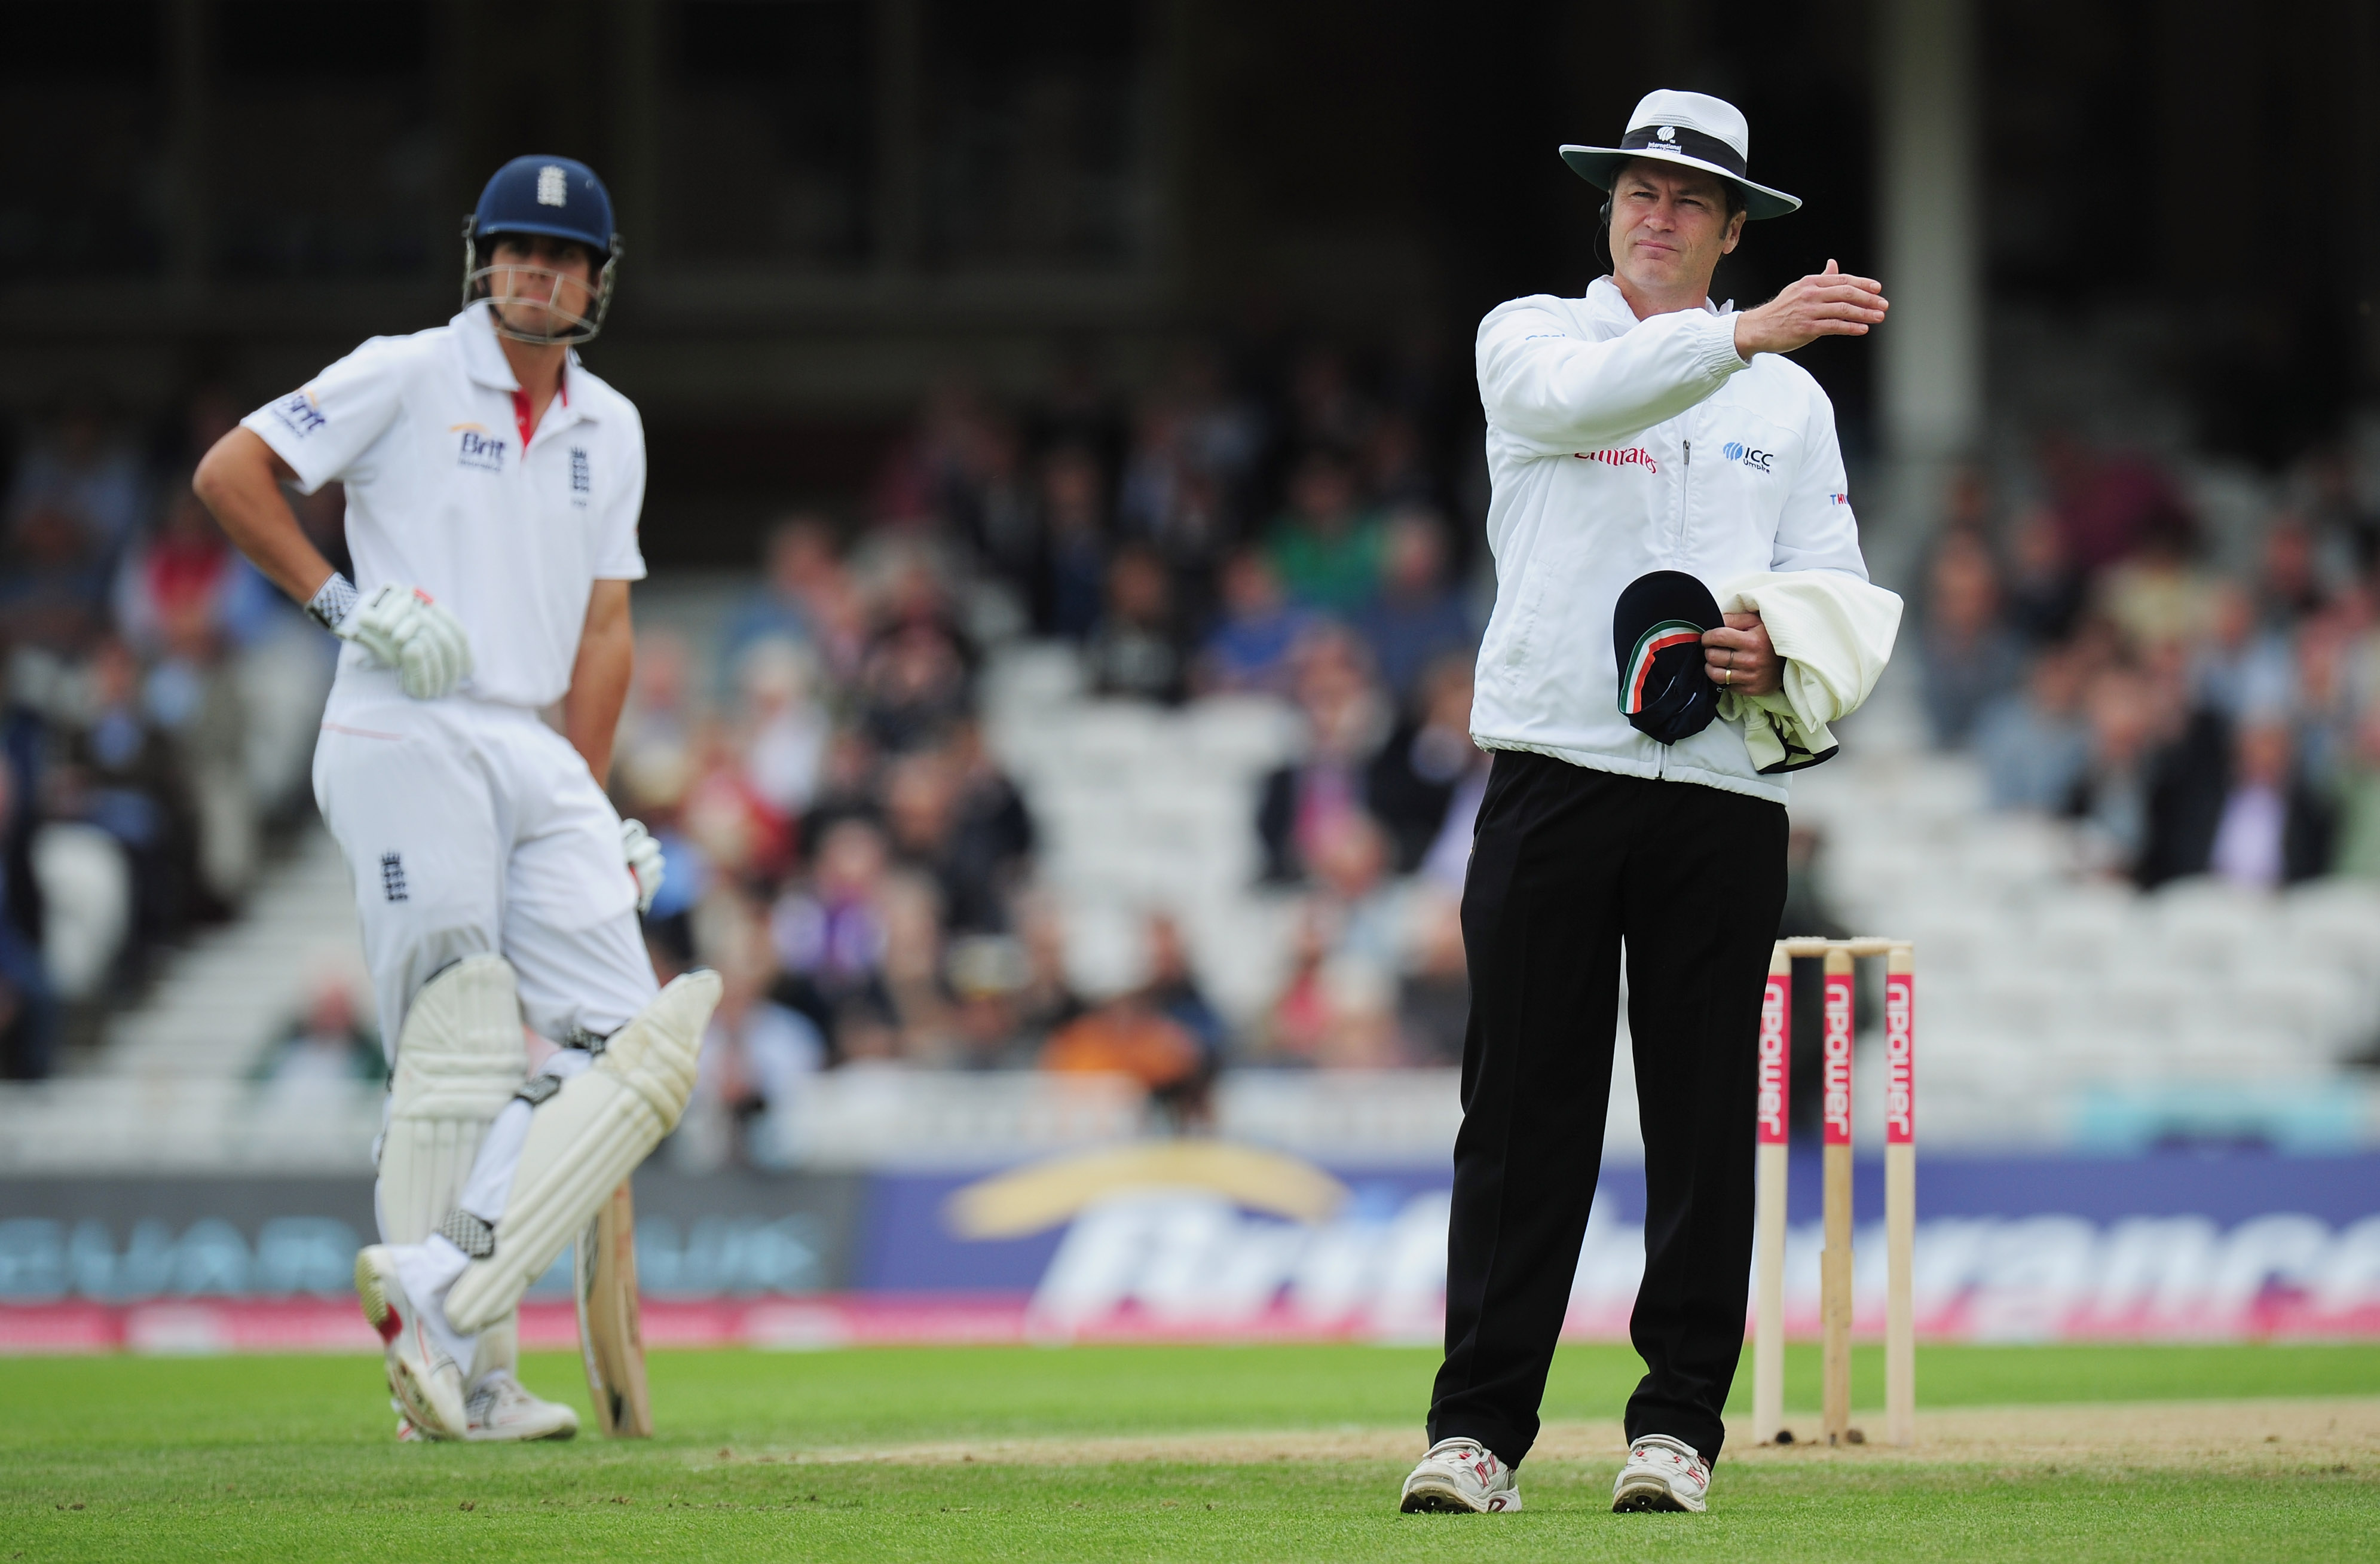 My style of umpiring included desensitising myself from the game, attests Simon Taufel